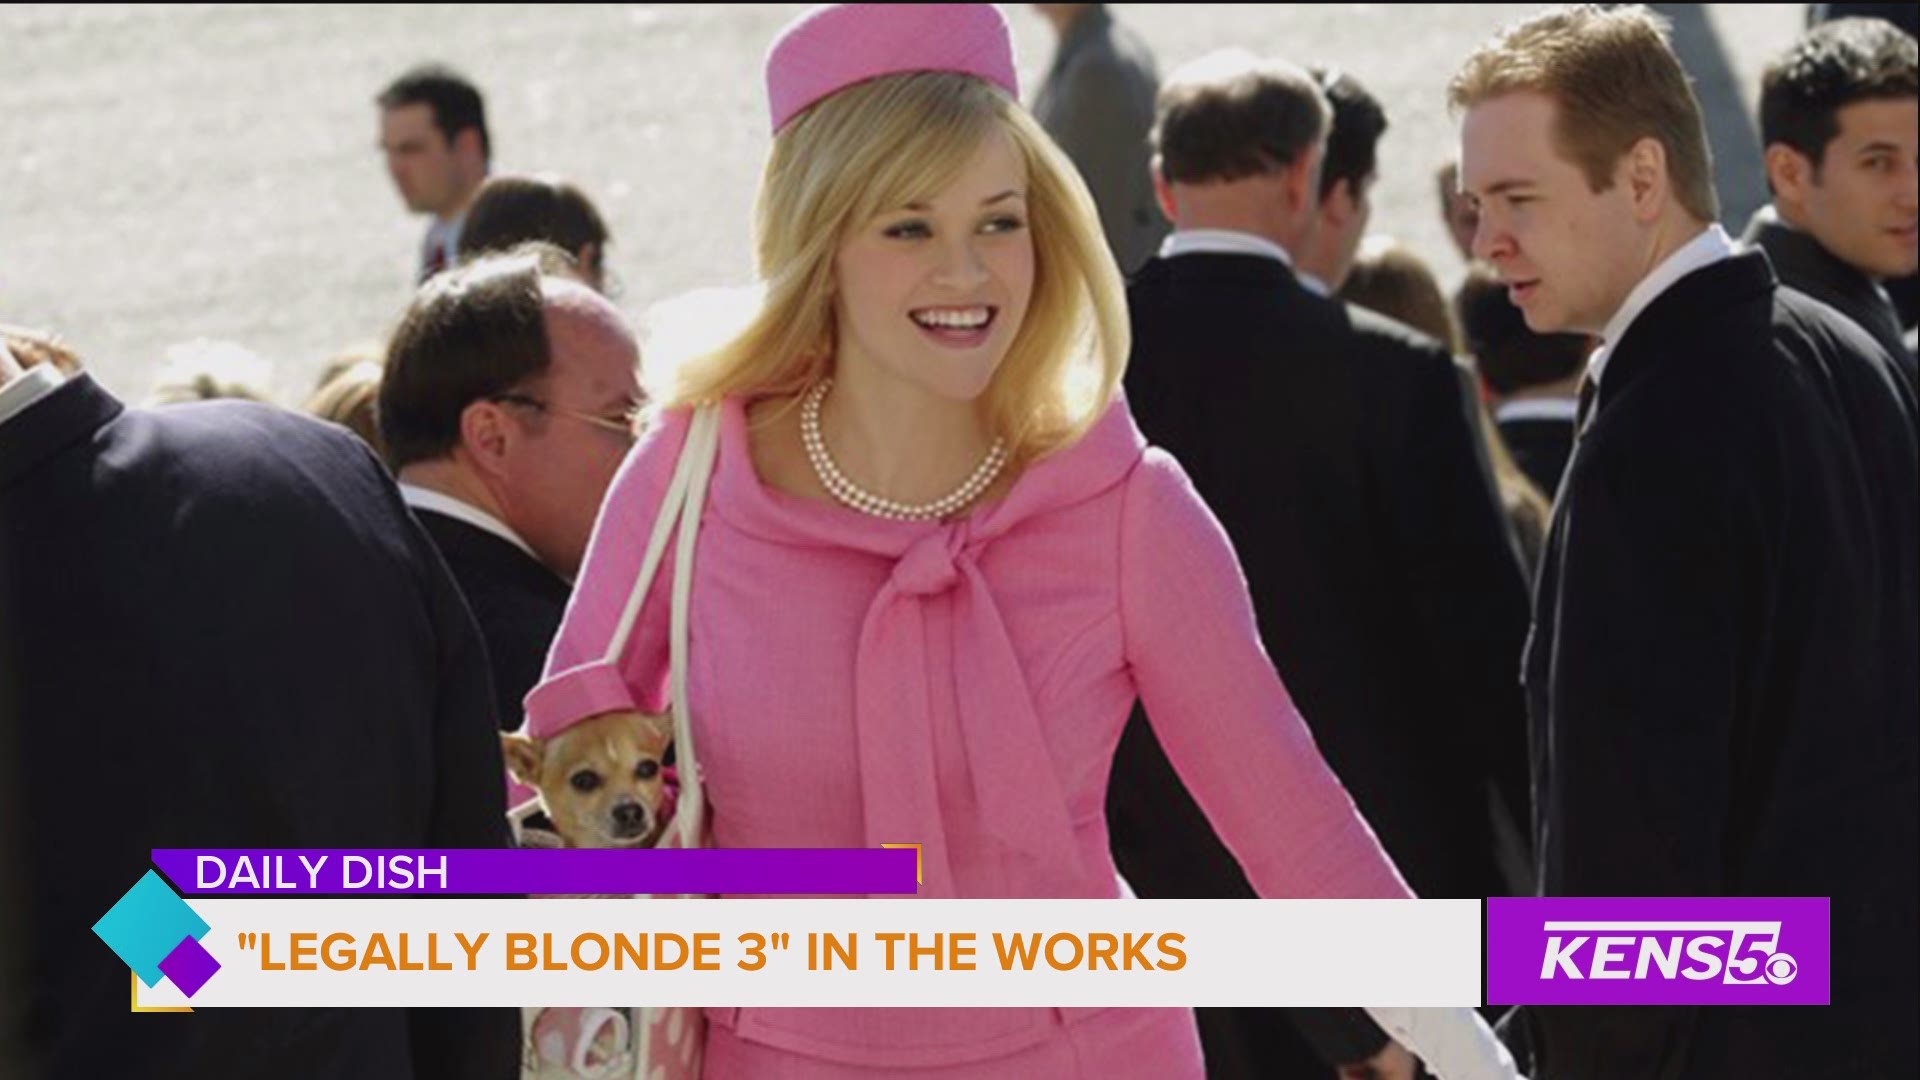 Legally Blonde 3 is in the works, Someone spent 560k on Michael Jordan's Sneakers, and more in today's Daily Dish.